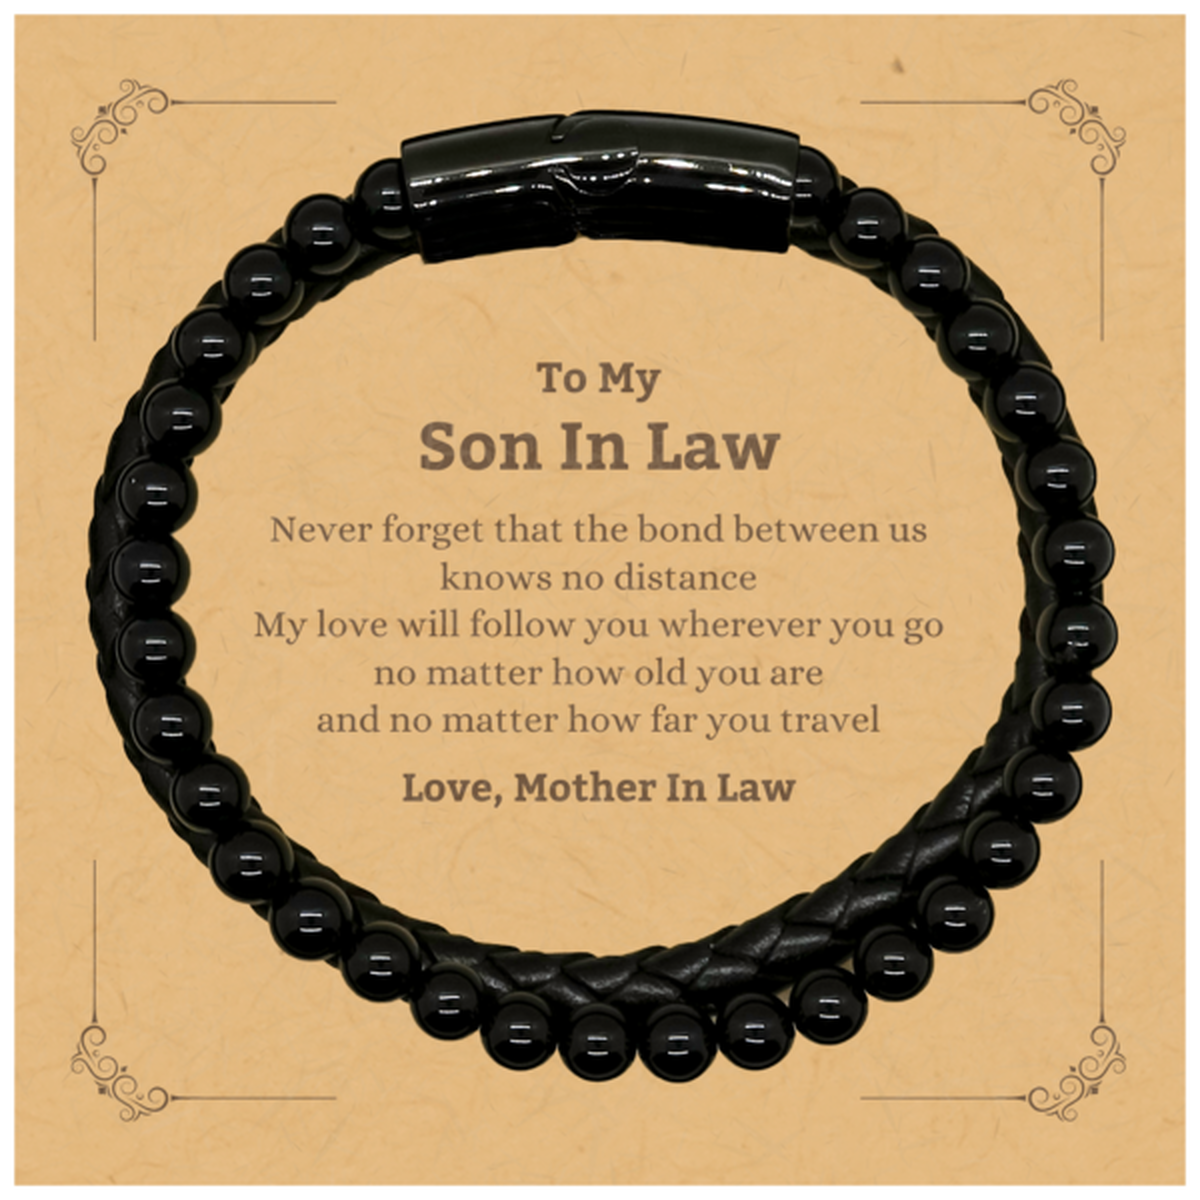 Son In Law Birthday Gifts from Mother In Law, Adjustable Stone Leather Bracelets for Son In Law Christmas Graduation Unique Gifts Son In Law Never forget that the bond between us knows no distance. Love, Mother In Law